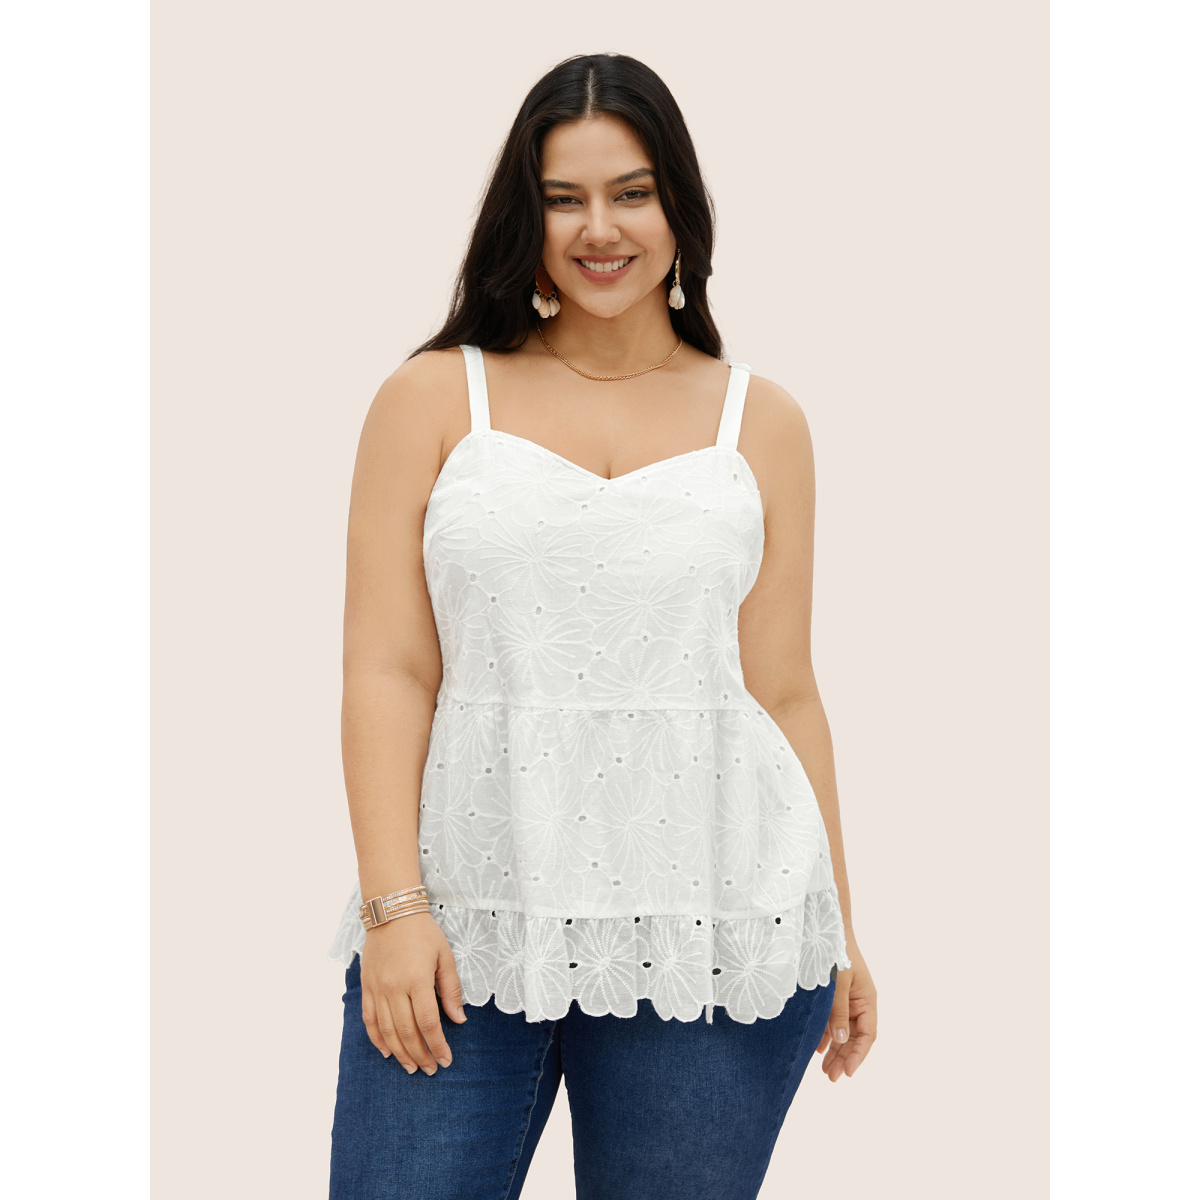 

Plus Size Solid Floral Cotton Blended Cami Top Women Ivory Resort Woven ribbon&lace trim Heart neckline Vacation Tank Tops Camis BloomChic